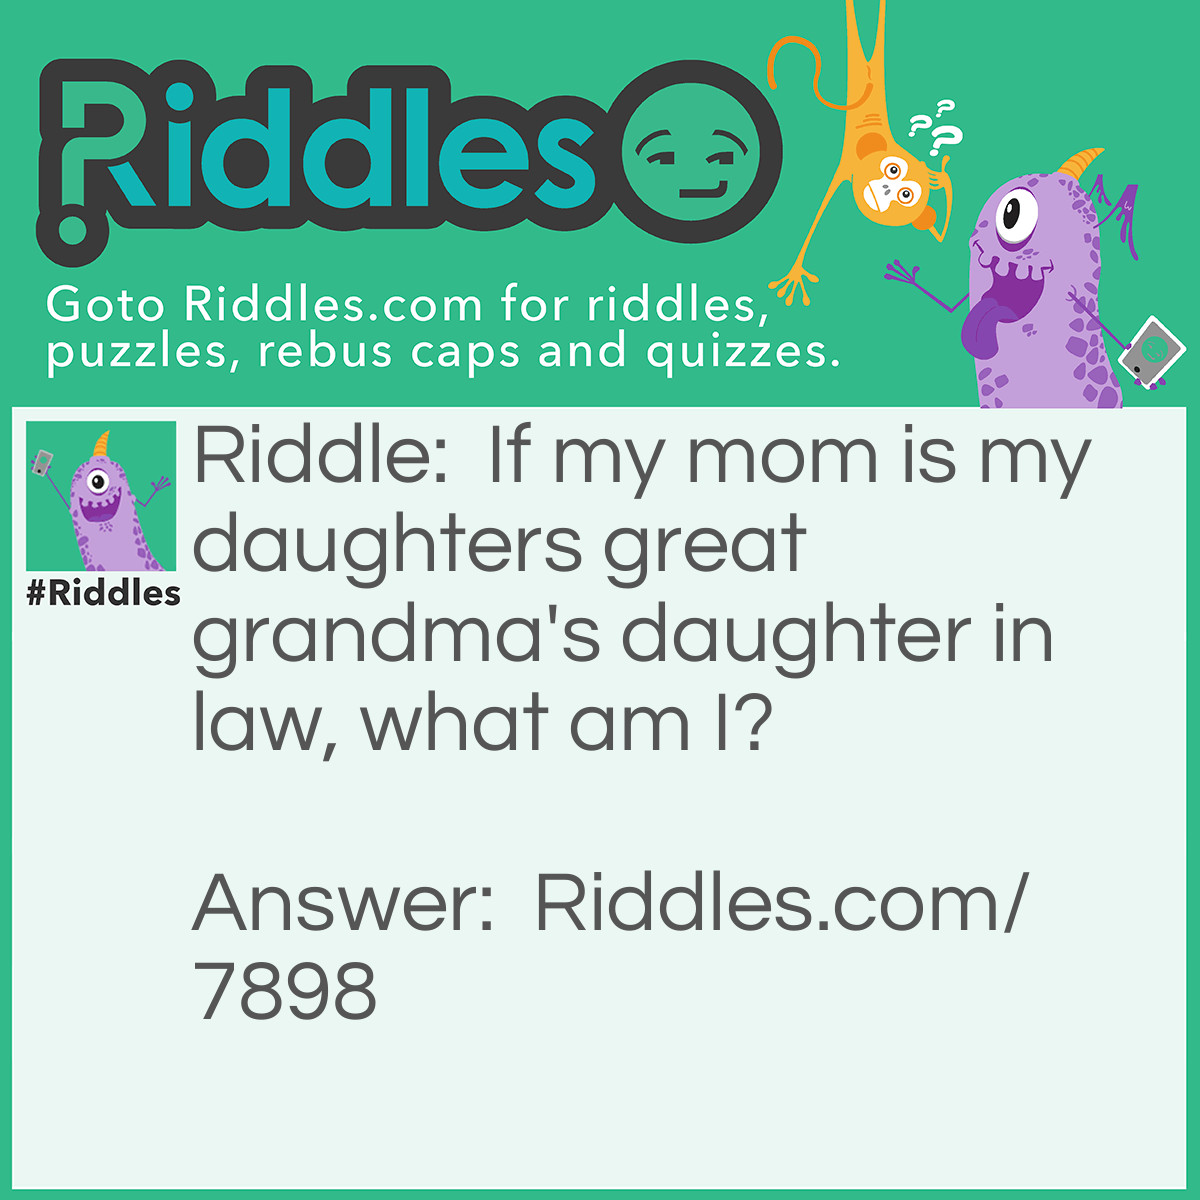 Riddle: If my mom is my daughters great grandma's daughter in law, what am I? Answer: I am my daughter's great grandma's grand daughter in law.